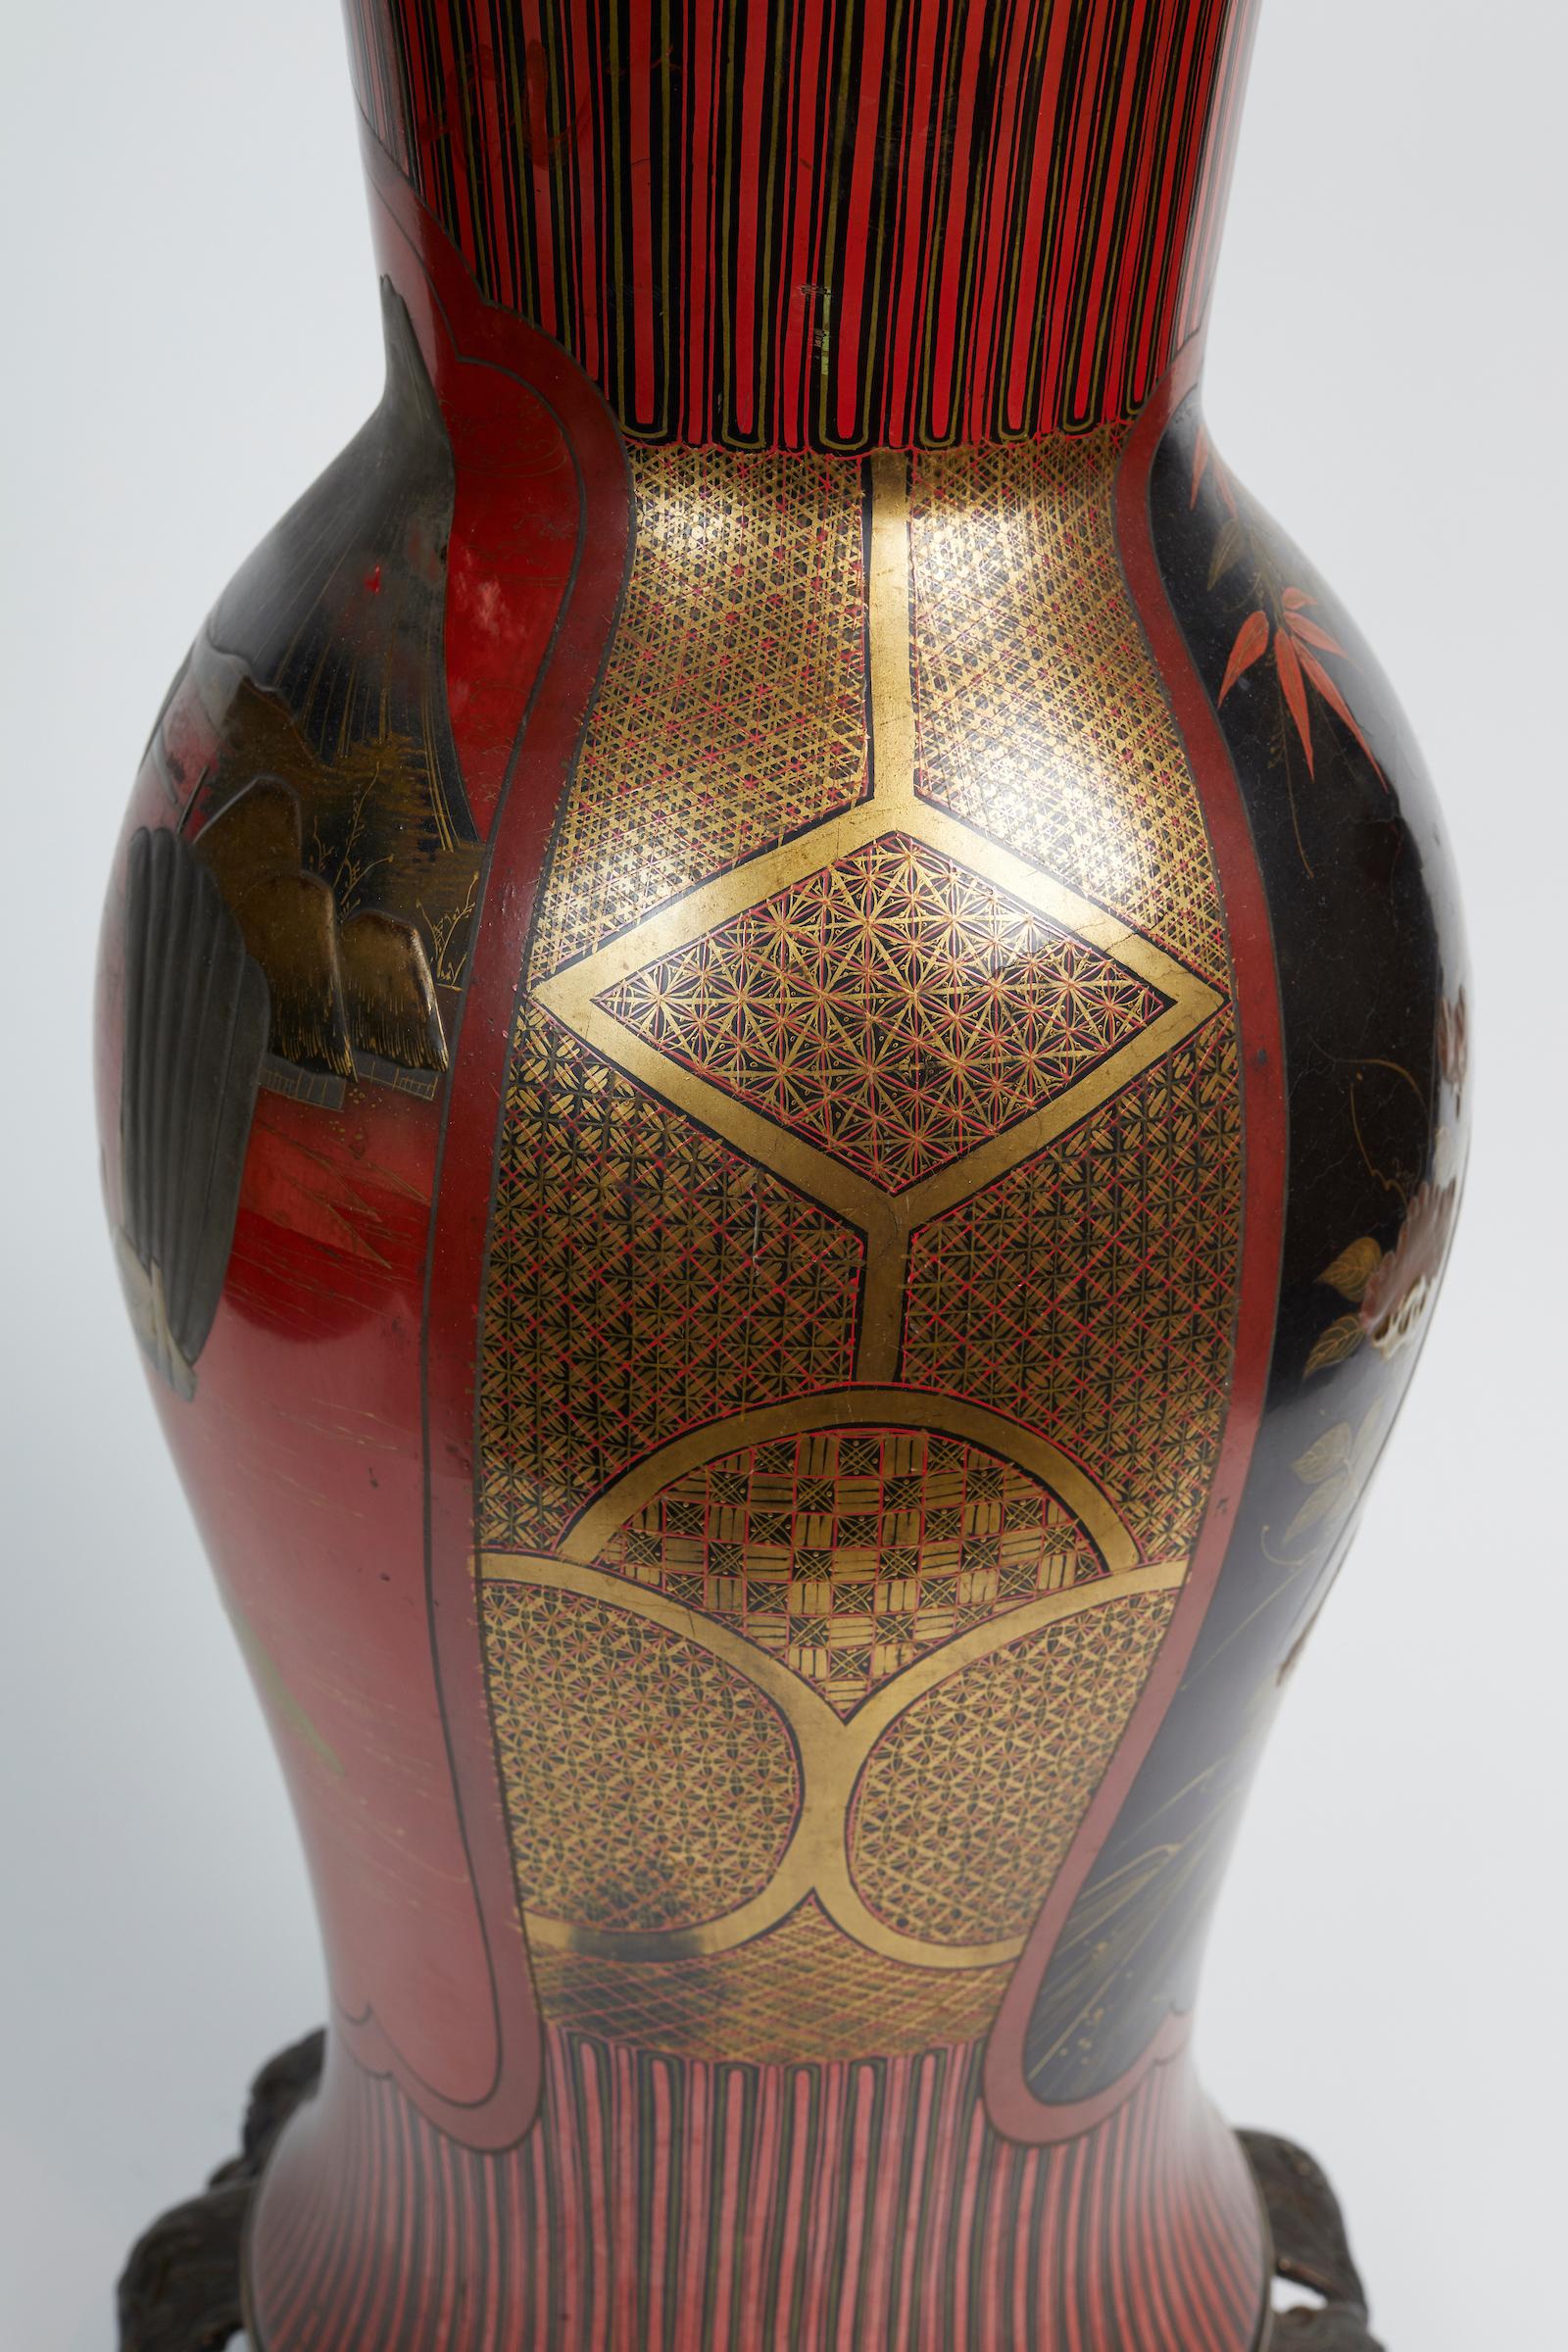 Late 19th Century Meji Period Red and Black Ceramic Japanese Vase Representing a Landscape